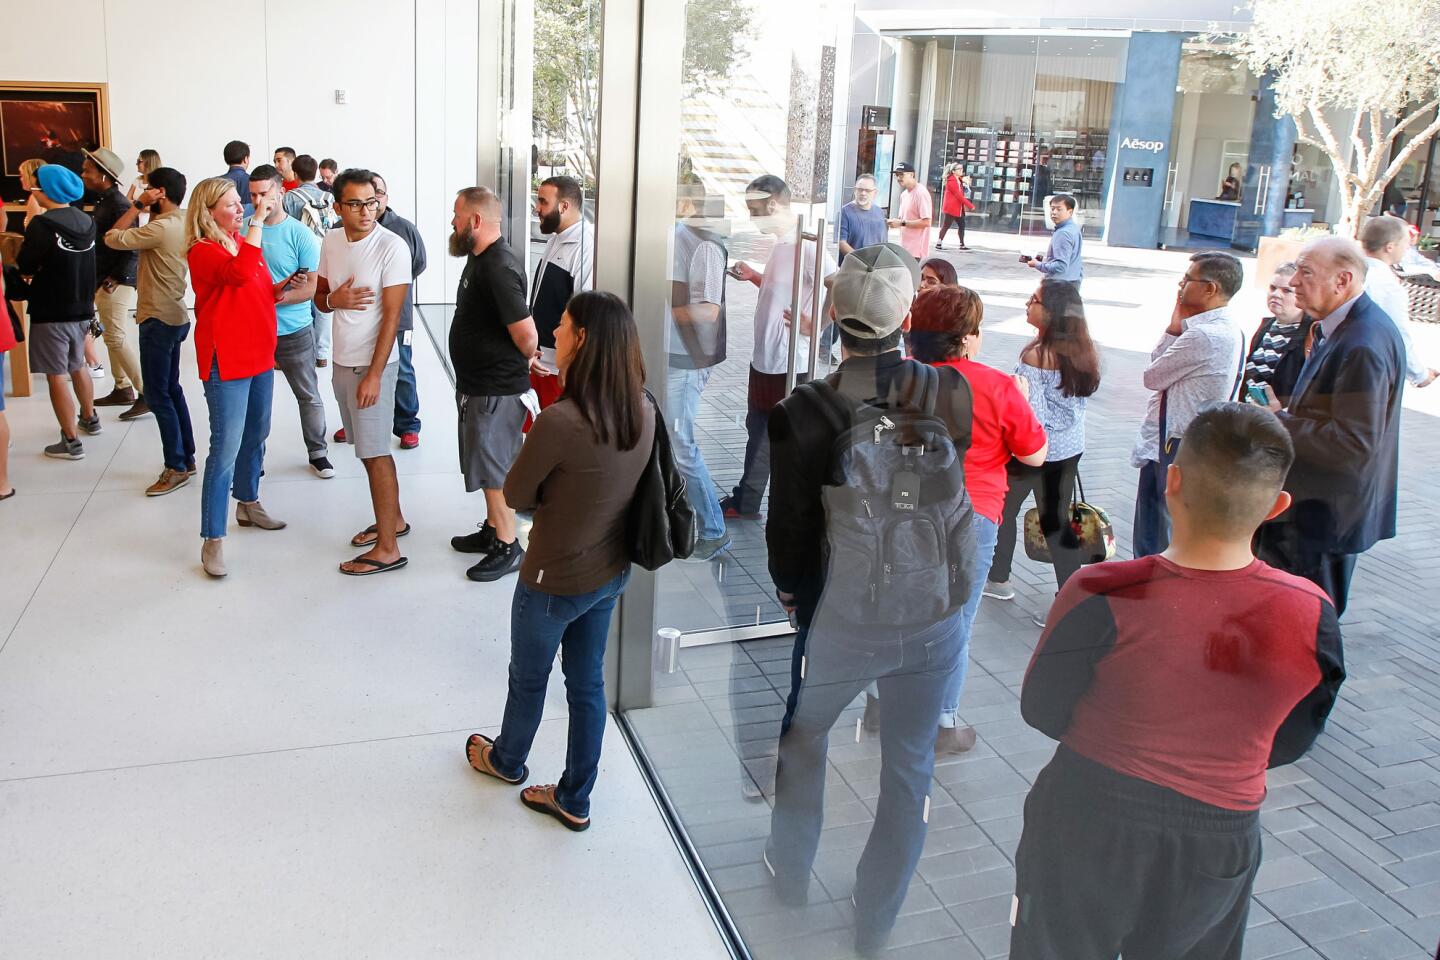 Apple retail store selling iPhones, iPads and more in sleekly designed  spaces. located in Westfield UTC. with pedestrians passing by outside the  store. La Jolla. San Diego, California, USA. March 23rd, 2019